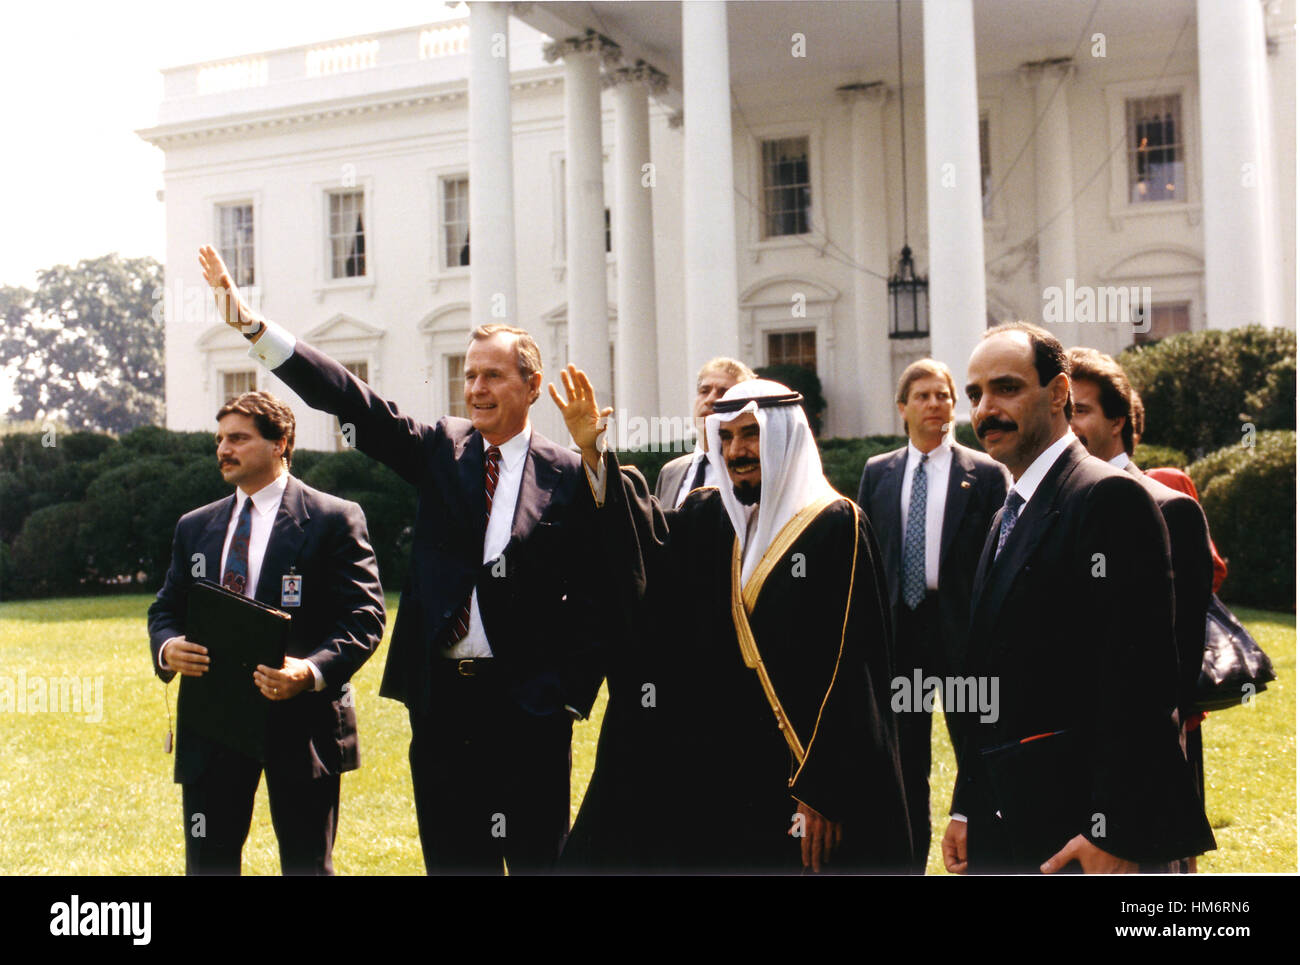 Washington, D.C. - September 28, 1990 -- United States President George H.W. Bush and His Highness Jabir al-Ahmad al-Jabir al-Sabah, the Emir of Kuwait wave to supporters from the north lawn of the White House in Washington, D.C. on September 28, 1990..Cr Stock Photo